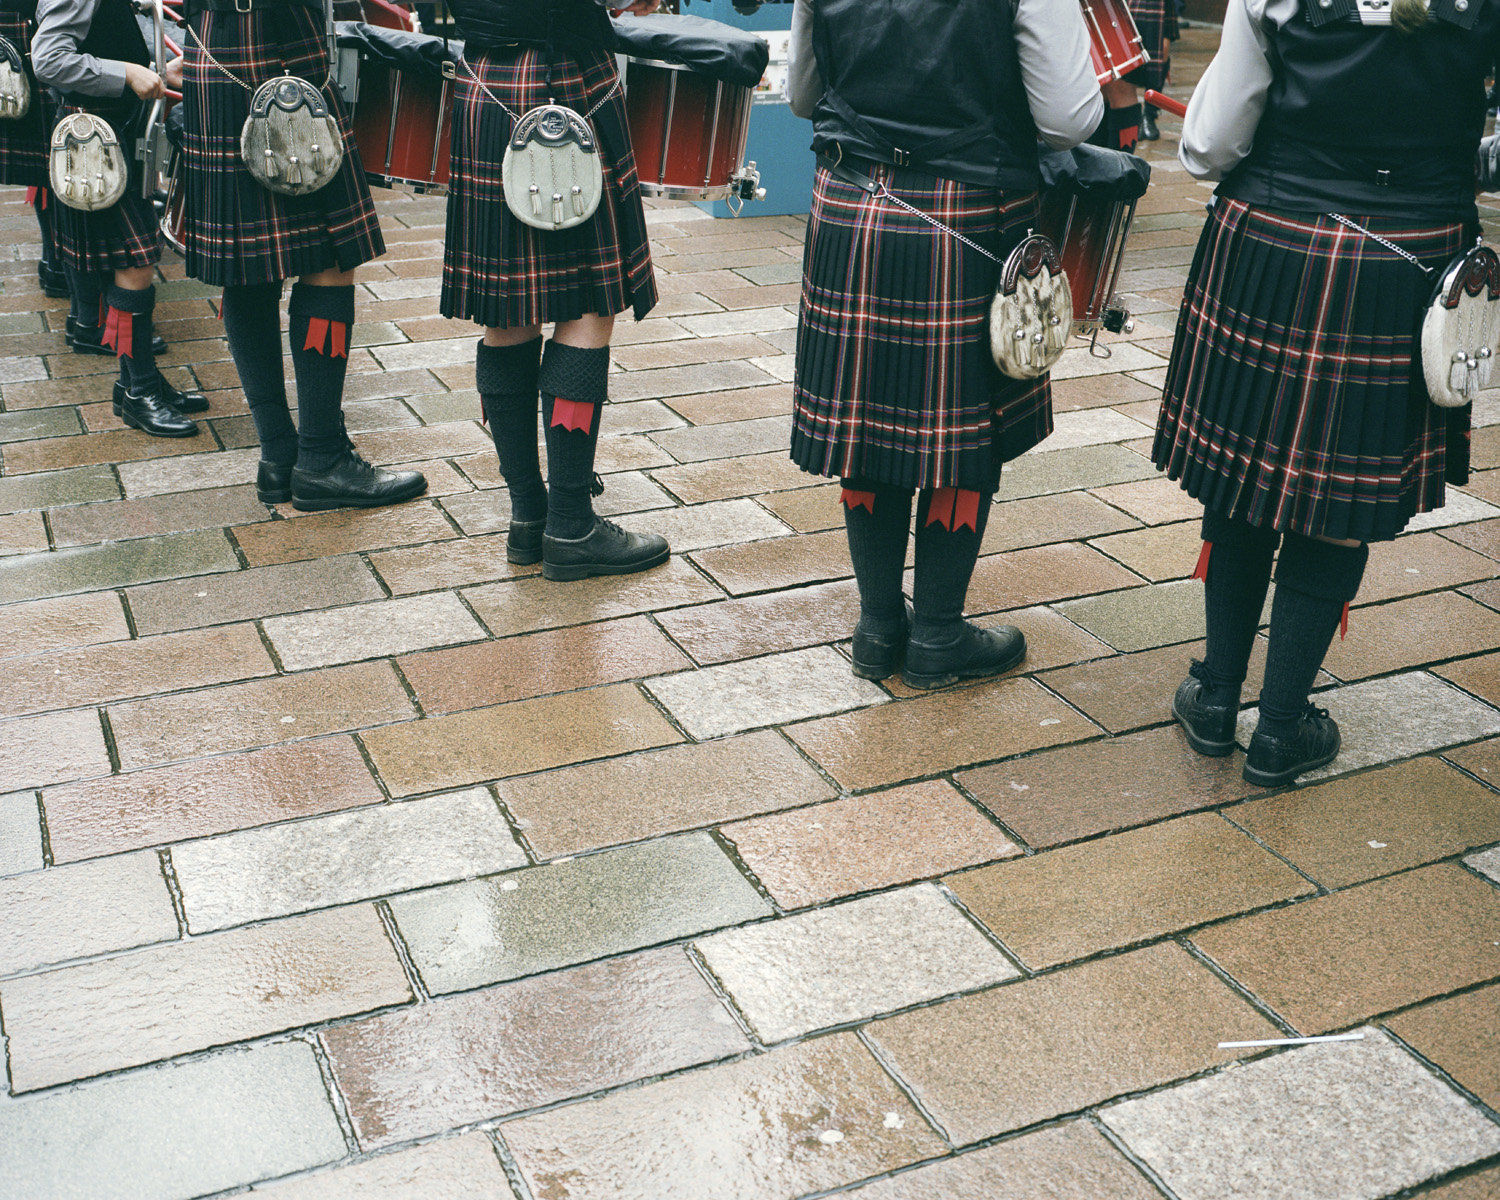 Glasgow, Scotland August 14, 2014The North Lanarkshire Schools Pipe Band performs at a pipe band parade in Glasgowjo metson scott for Time